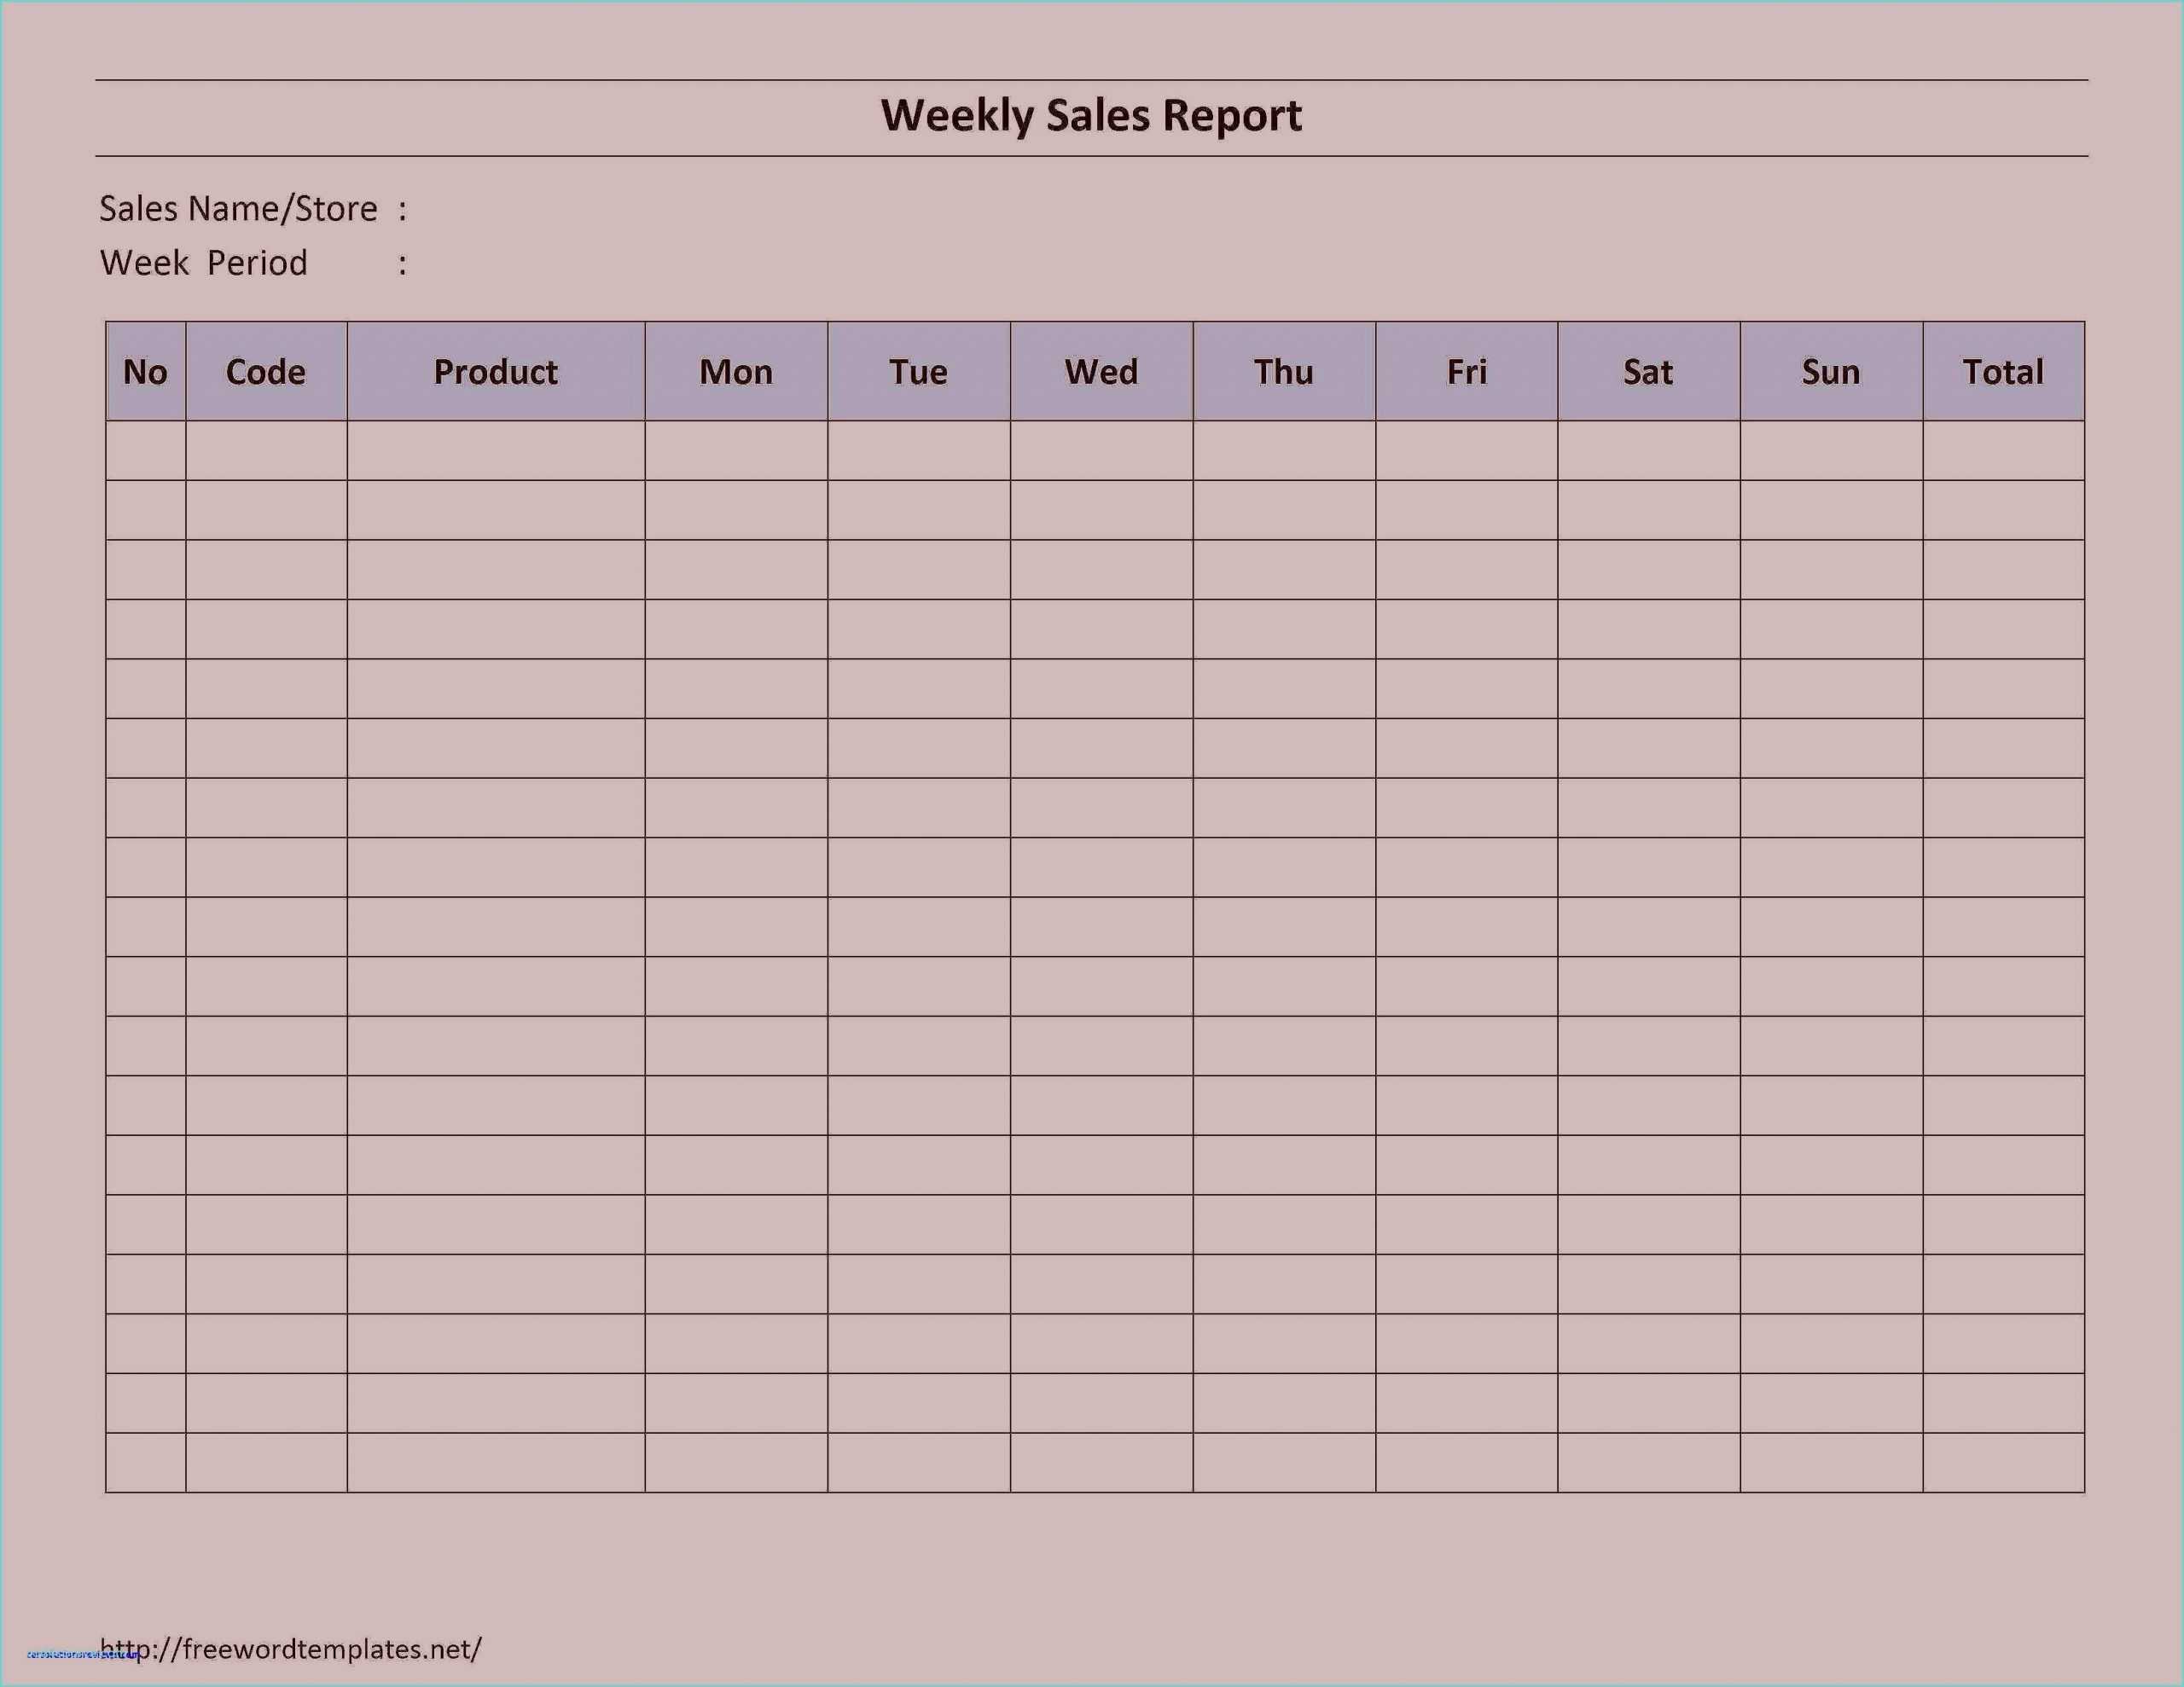 Spreadsheet Report And Weekly Sales Template Activity Inside Sales Activity Report Template Excel